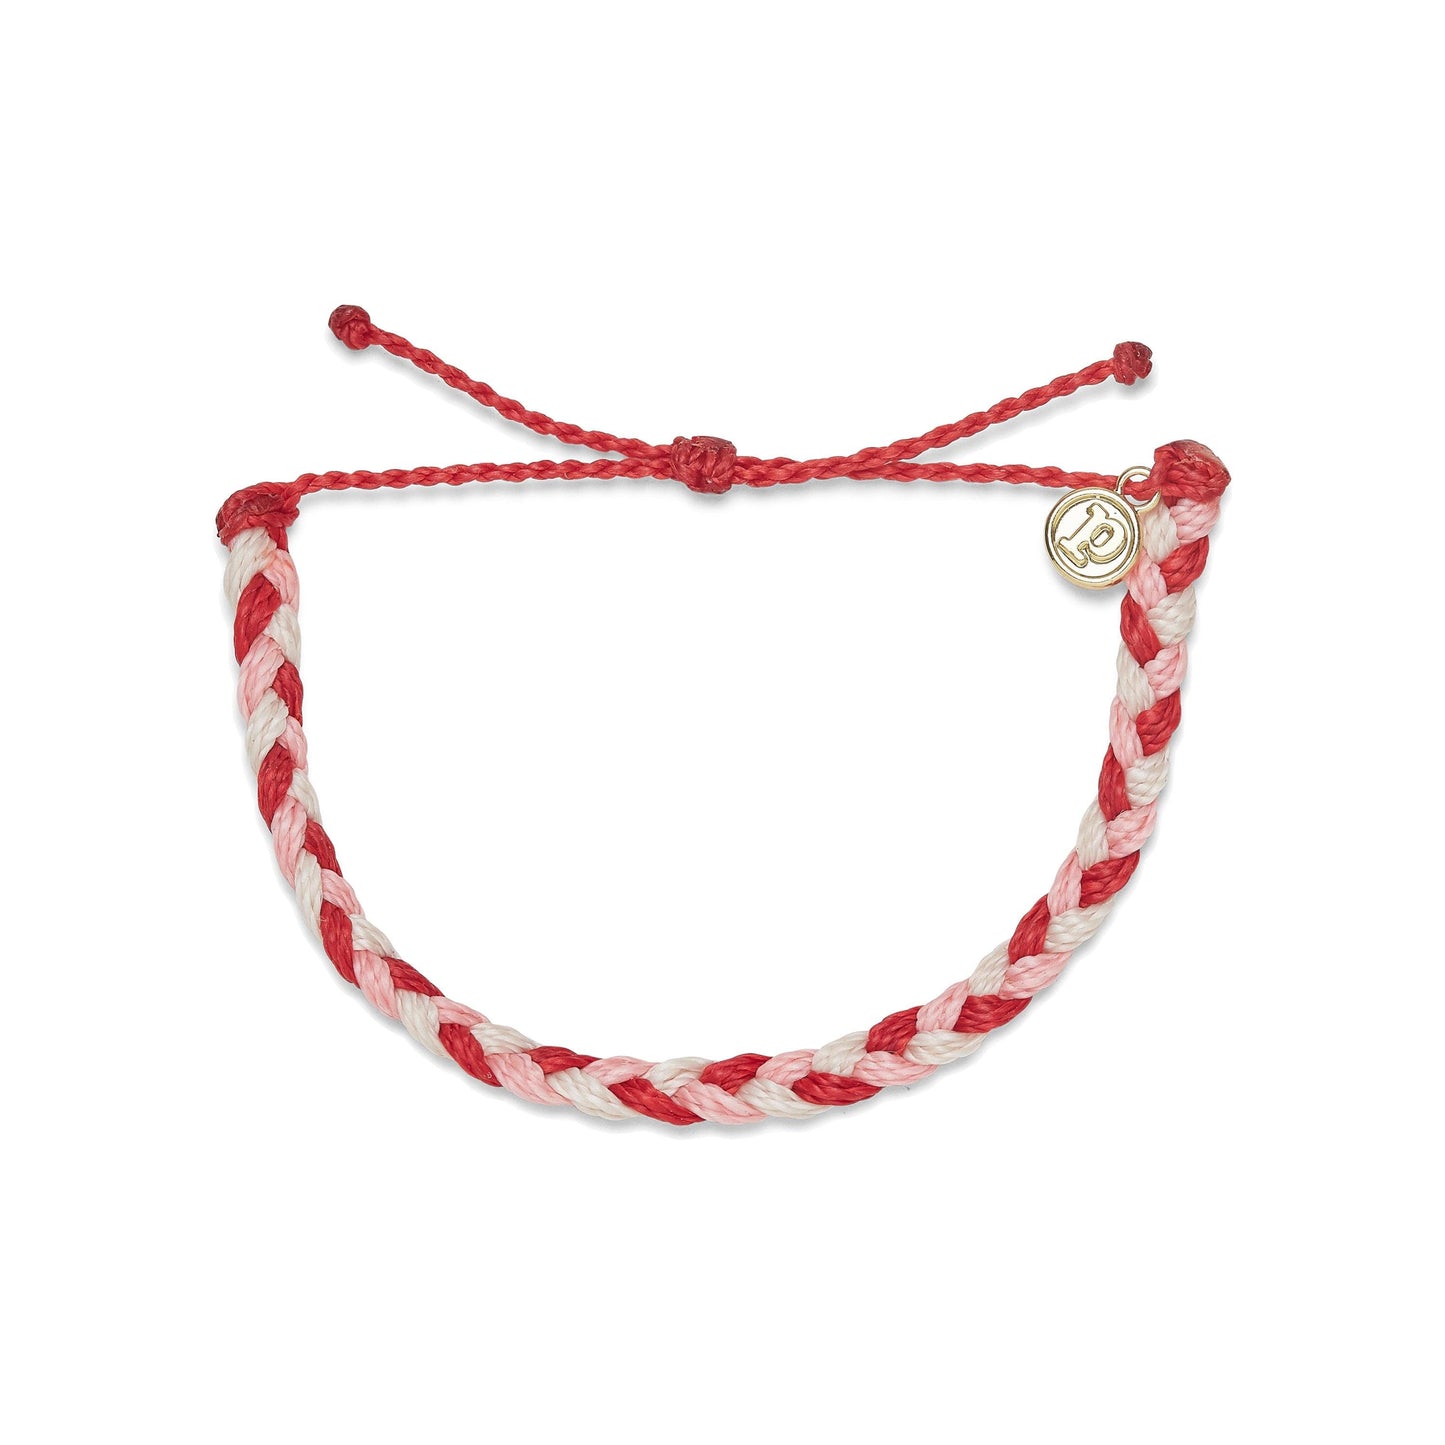 Charity Braid Bracelet - The Salty Mare